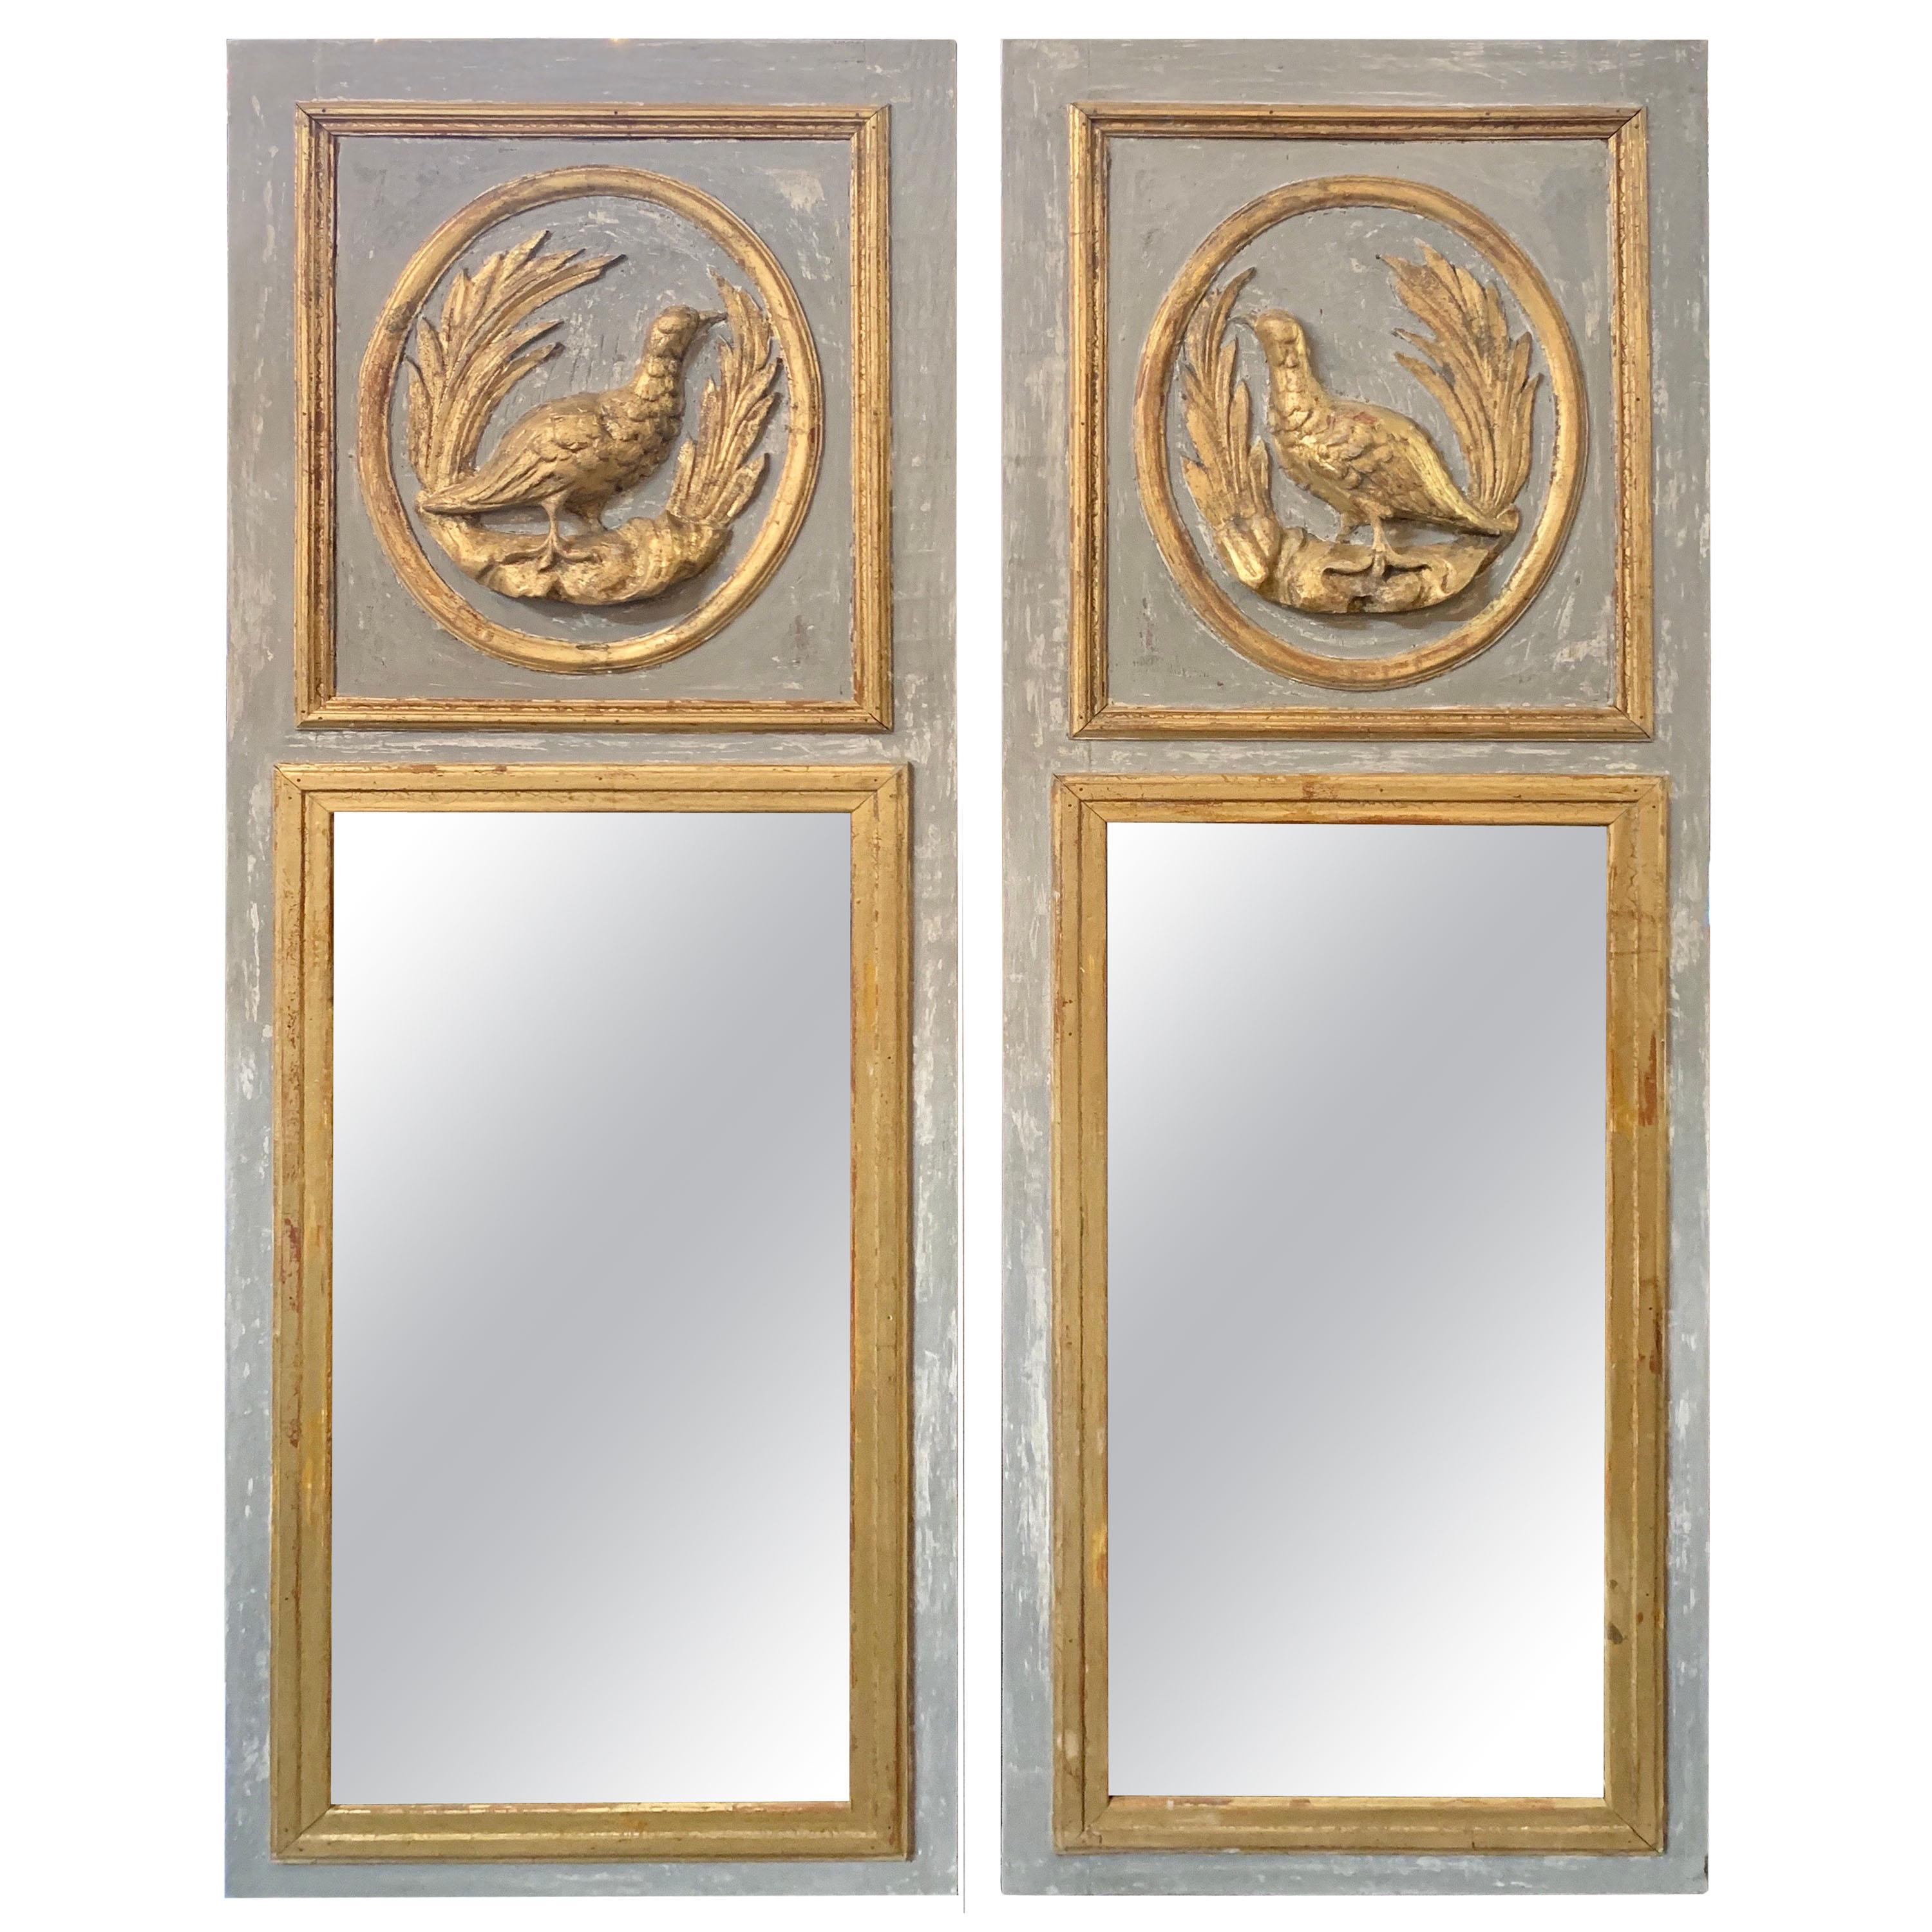 Pair of Italian Carved and Parcel-Gilt Trumeau Mirrors with Birds